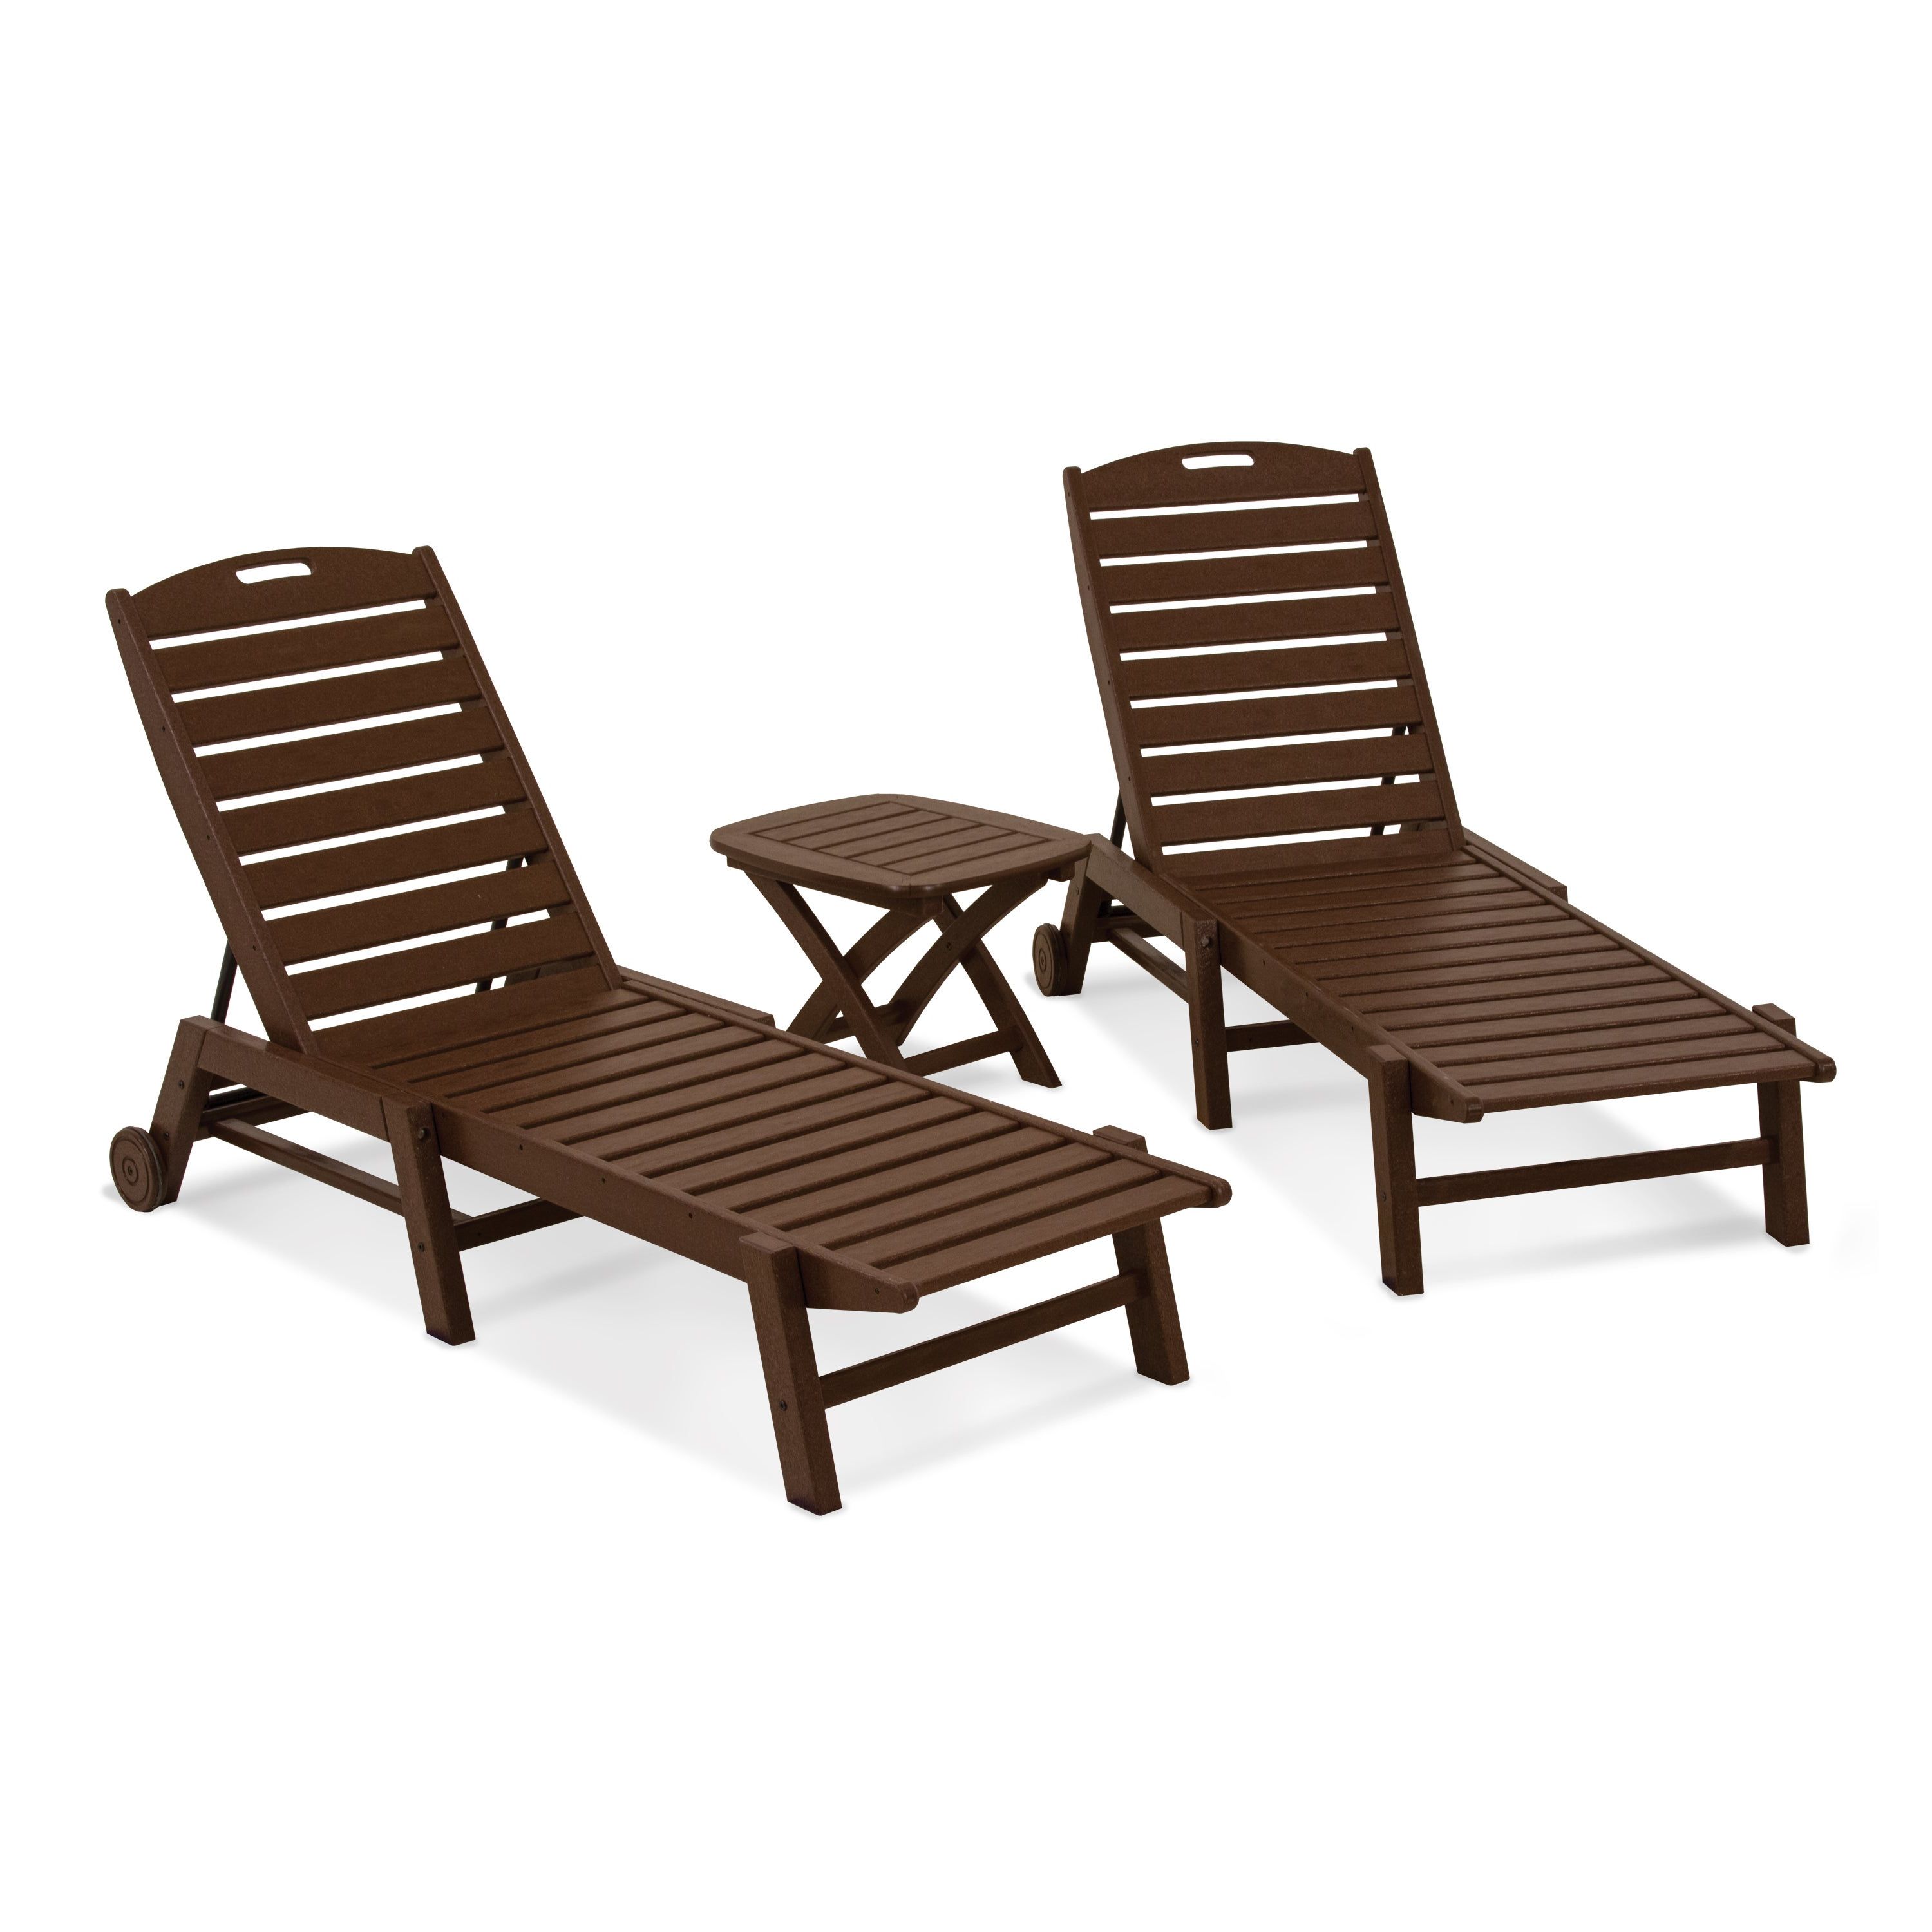 Most Recent Polywood® Nautical 3 Piece Outdoor Chaise Lounge Set With Table Inside Outdoor 3 Piece Chaise Lounger Sets With Table (View 16 of 25)